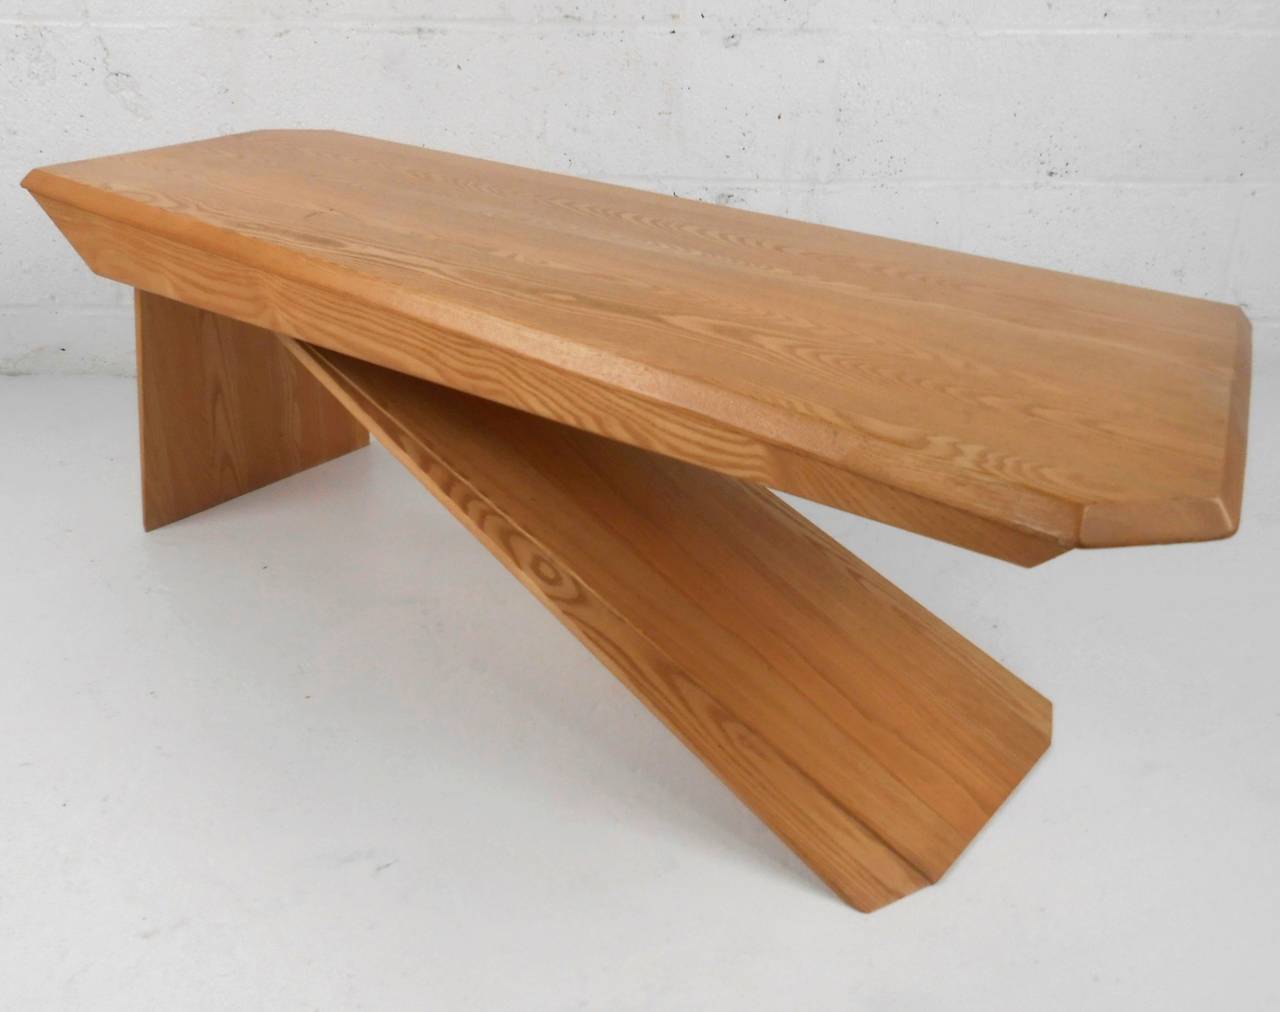 This beautiful cantilevered coffee table features unique angles and wonderful woodgrain. Modern architectural design at it's best and suitable for any interior setting. Please confirm item location (NY or NJ).